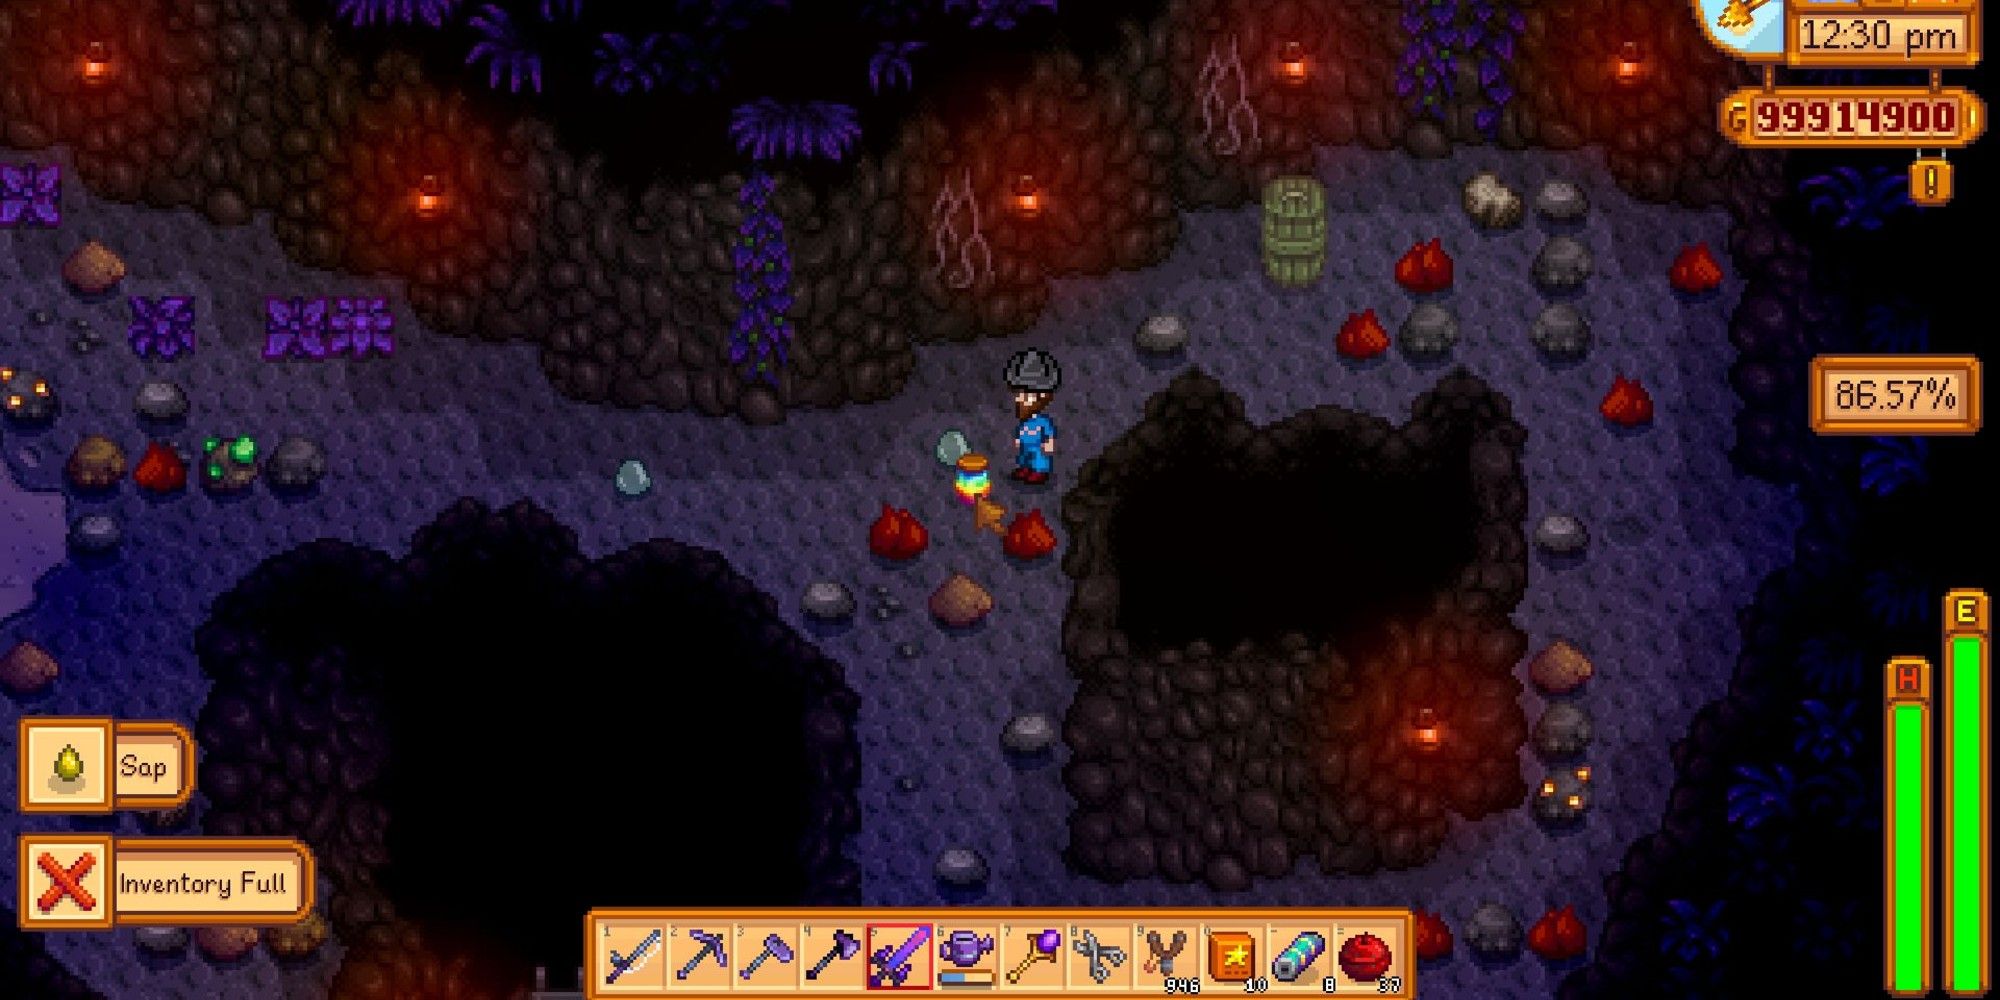 A player finds Prismatic Slime on one of the floors of the mountain mine in Stardew Valley